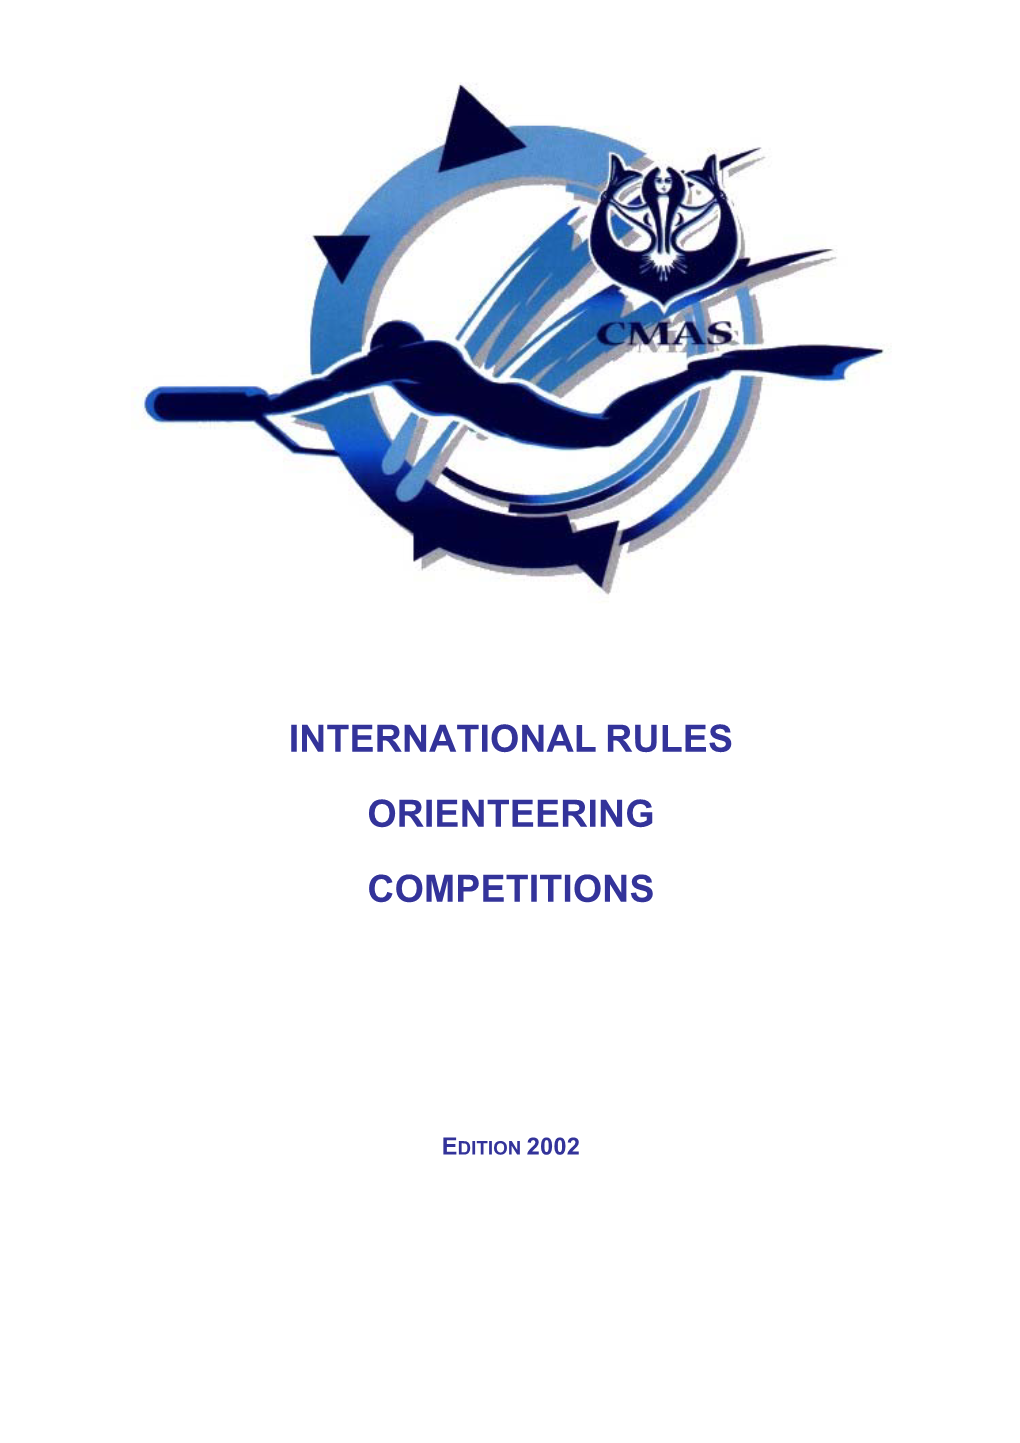 International Rules Orienteering Competitions